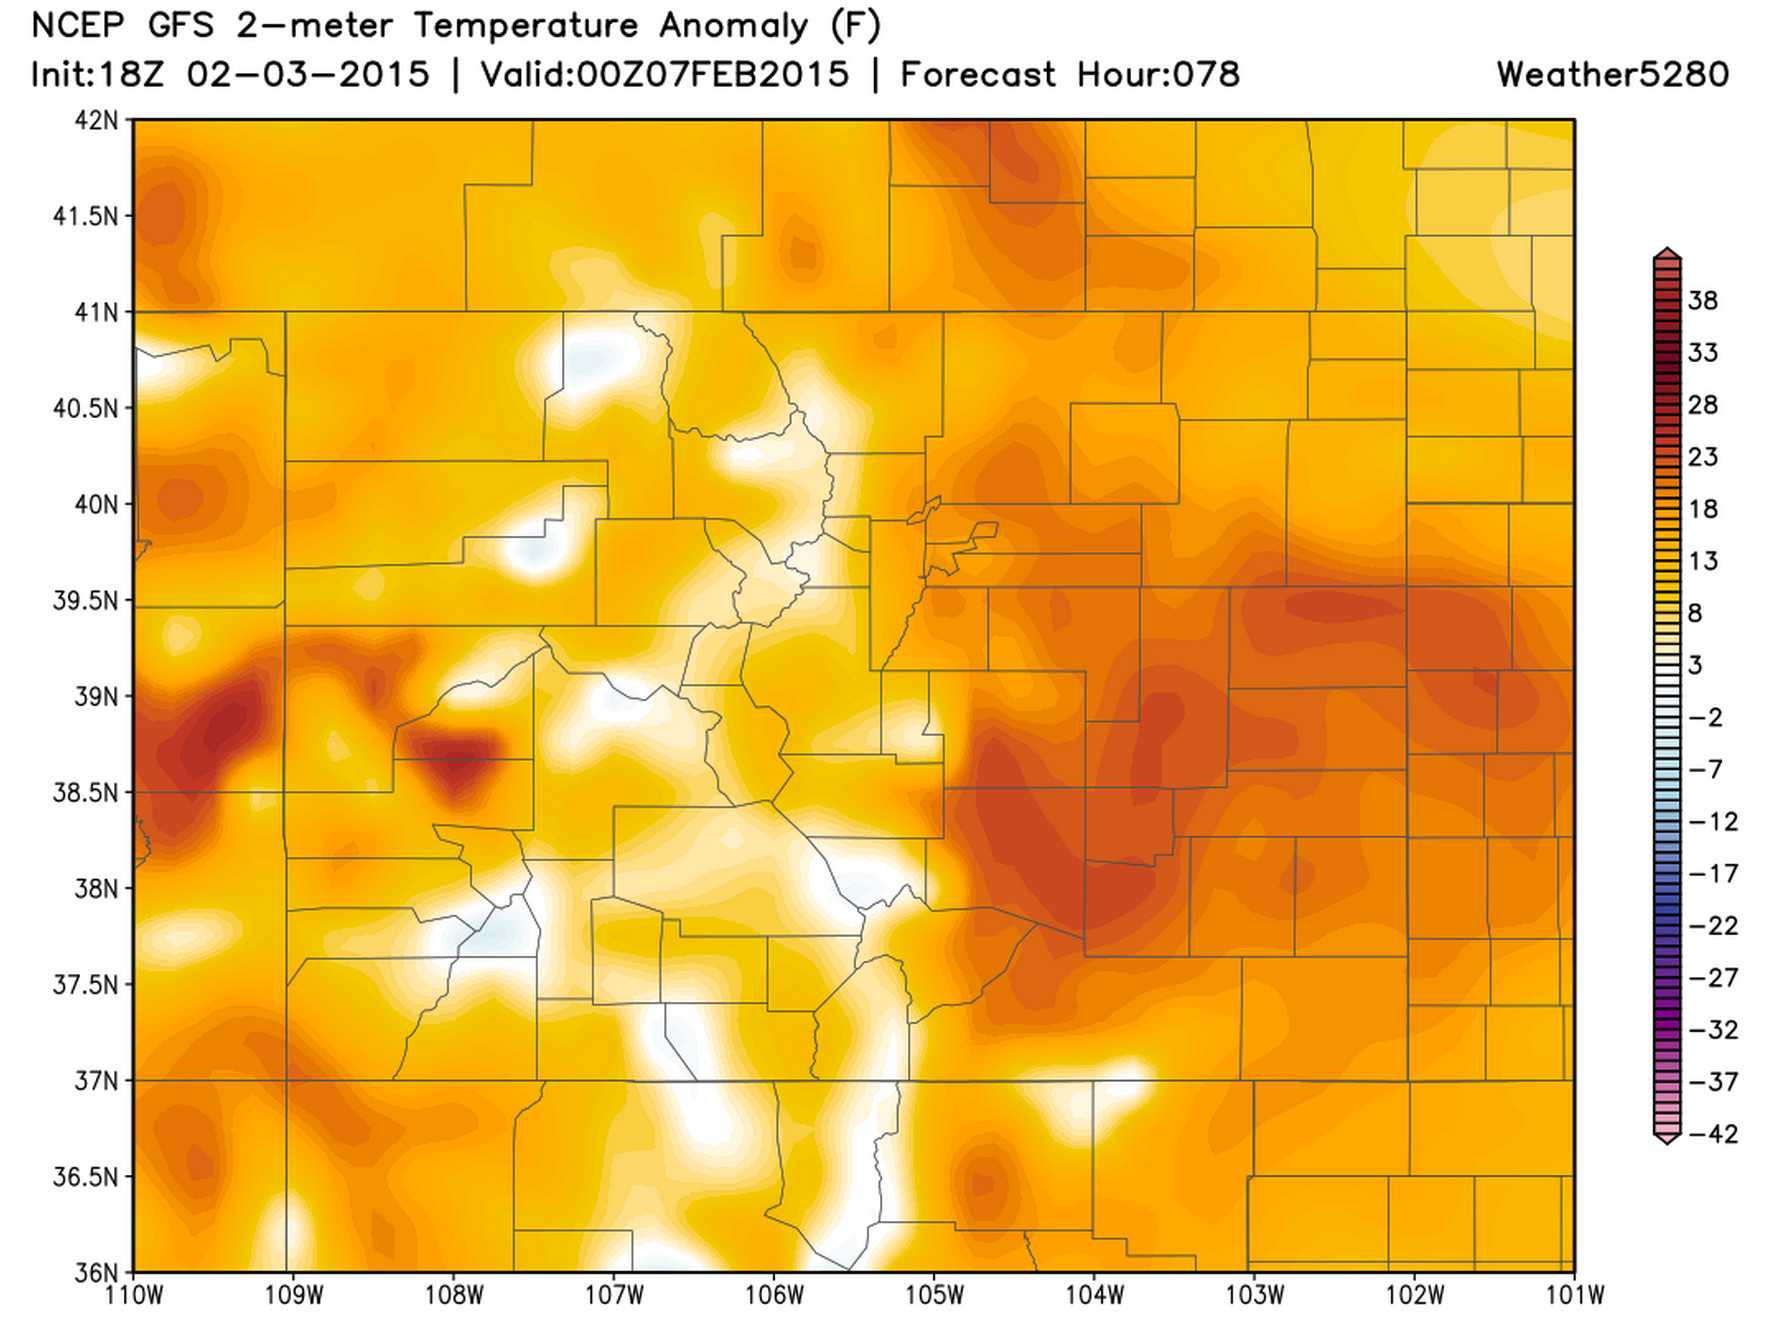 GFS temperature anomaly forecast | Weather5280 Models